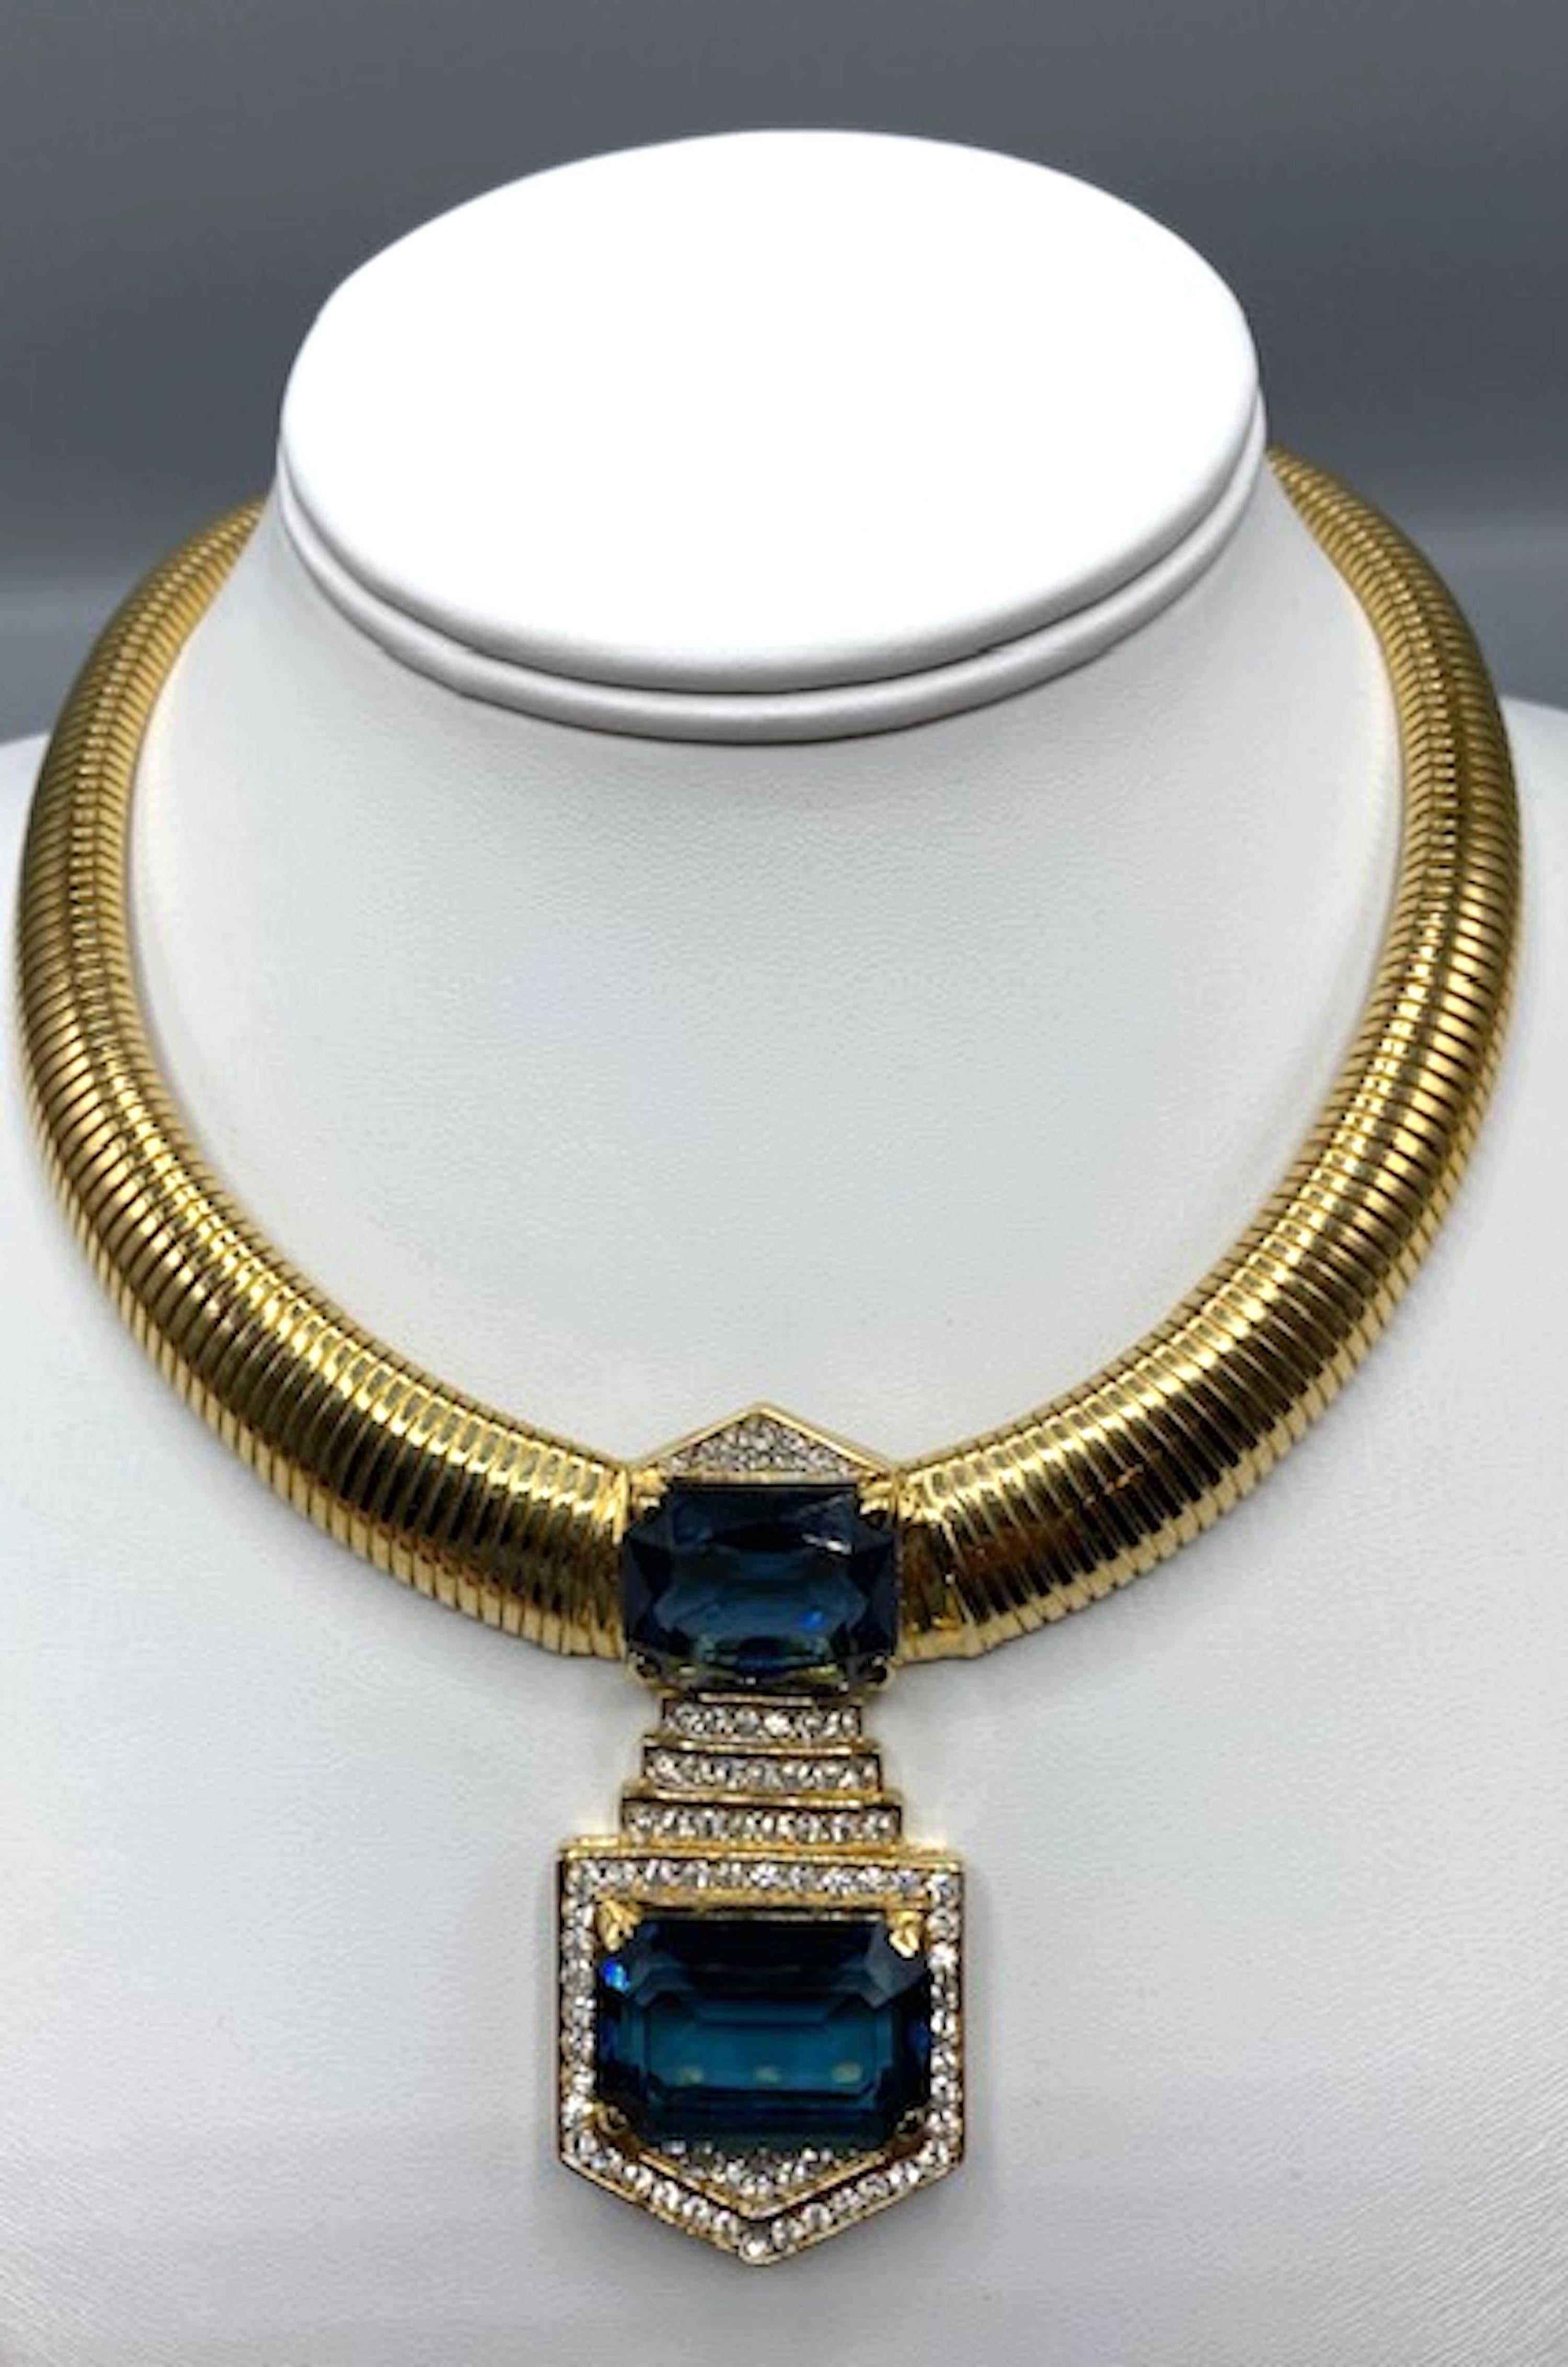 A lovely quality Omega-style Art Deco Style necklace by the high-end Canadian costume jeweller D'Orlan. Gold plated, pave rhinstone on the pendant, with two cushion cut blue stone in the center.
Very fine condition.
Stamped D'ORLAN on the pendant,